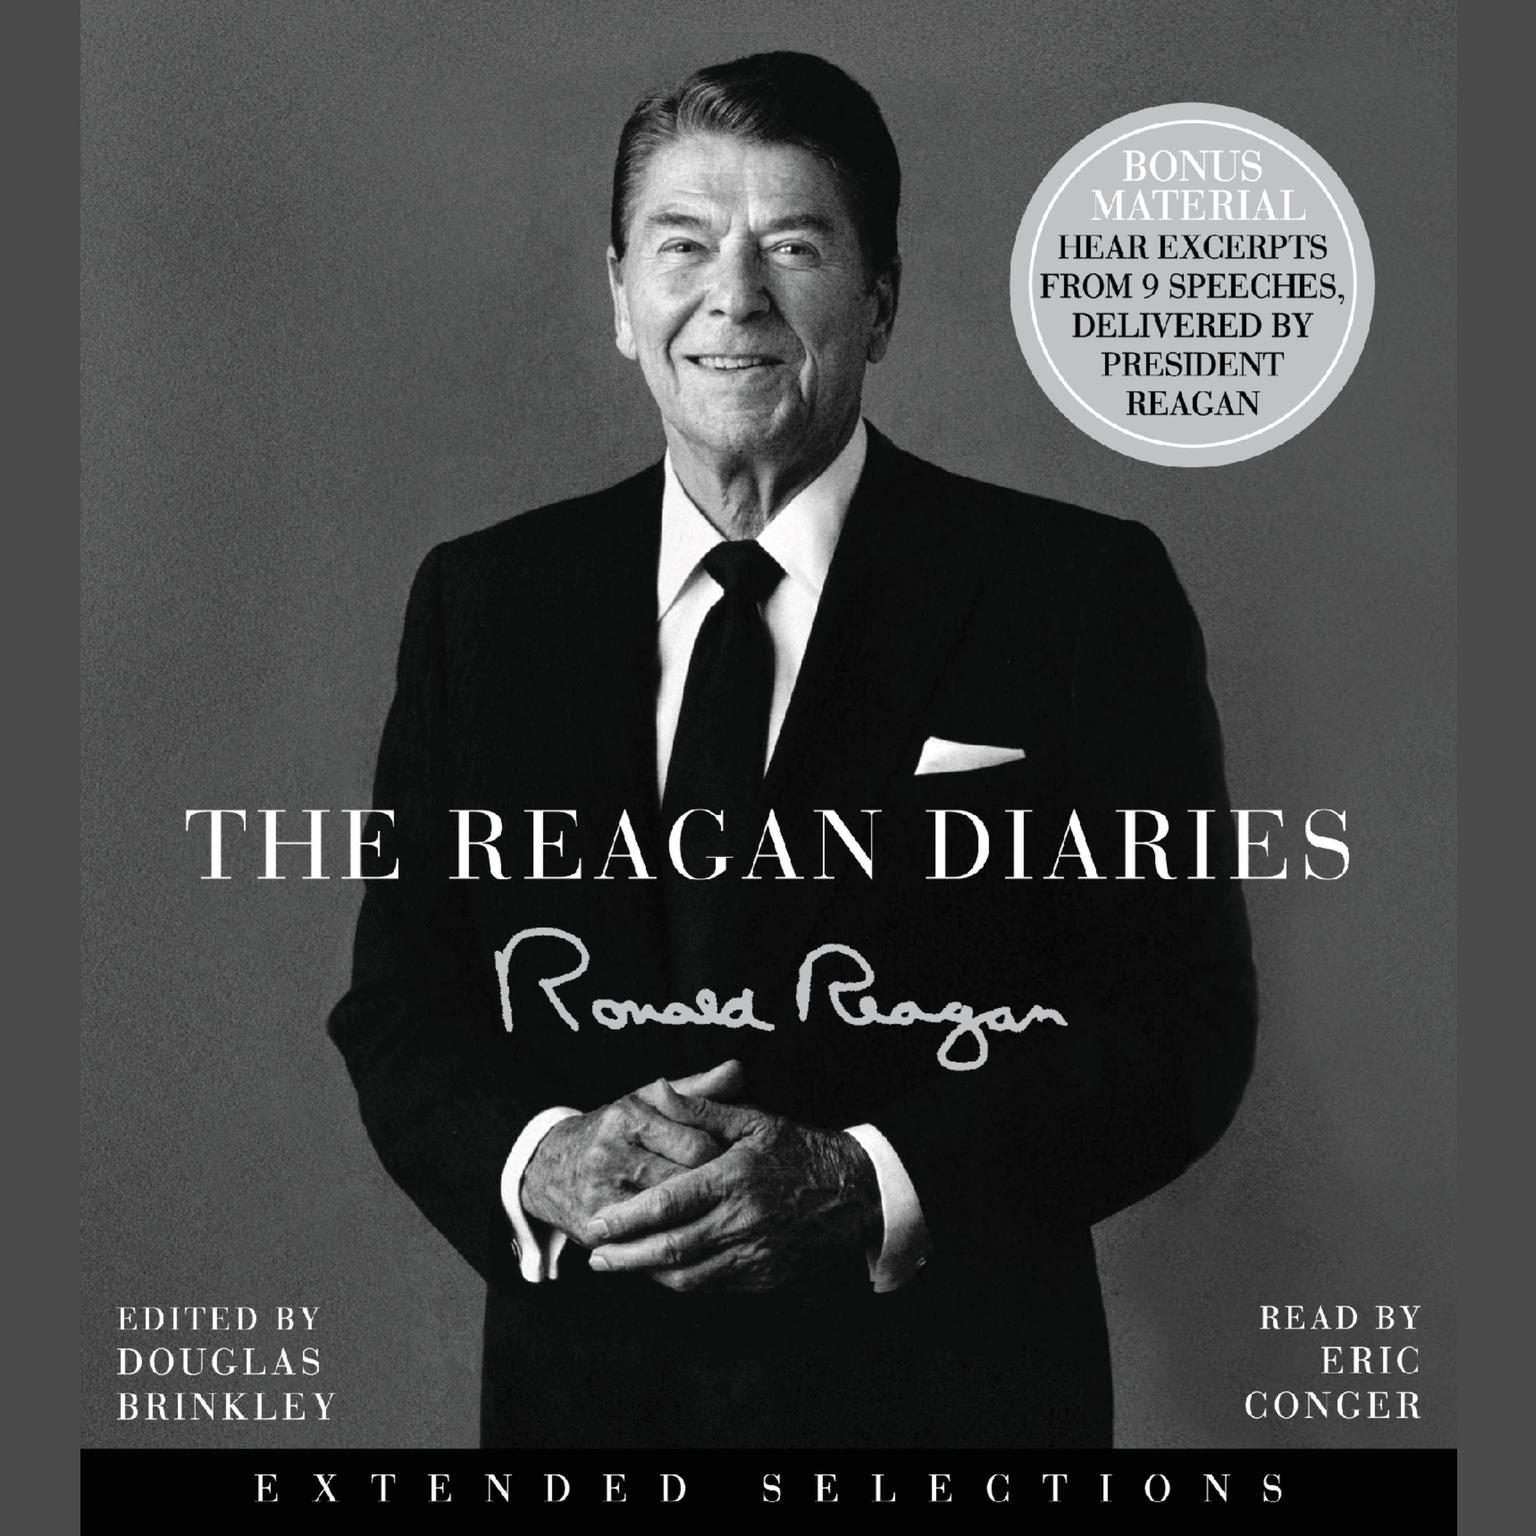 The Reagan Diaries Extended Selections (Abridged) Audiobook, by Ronald Reagan